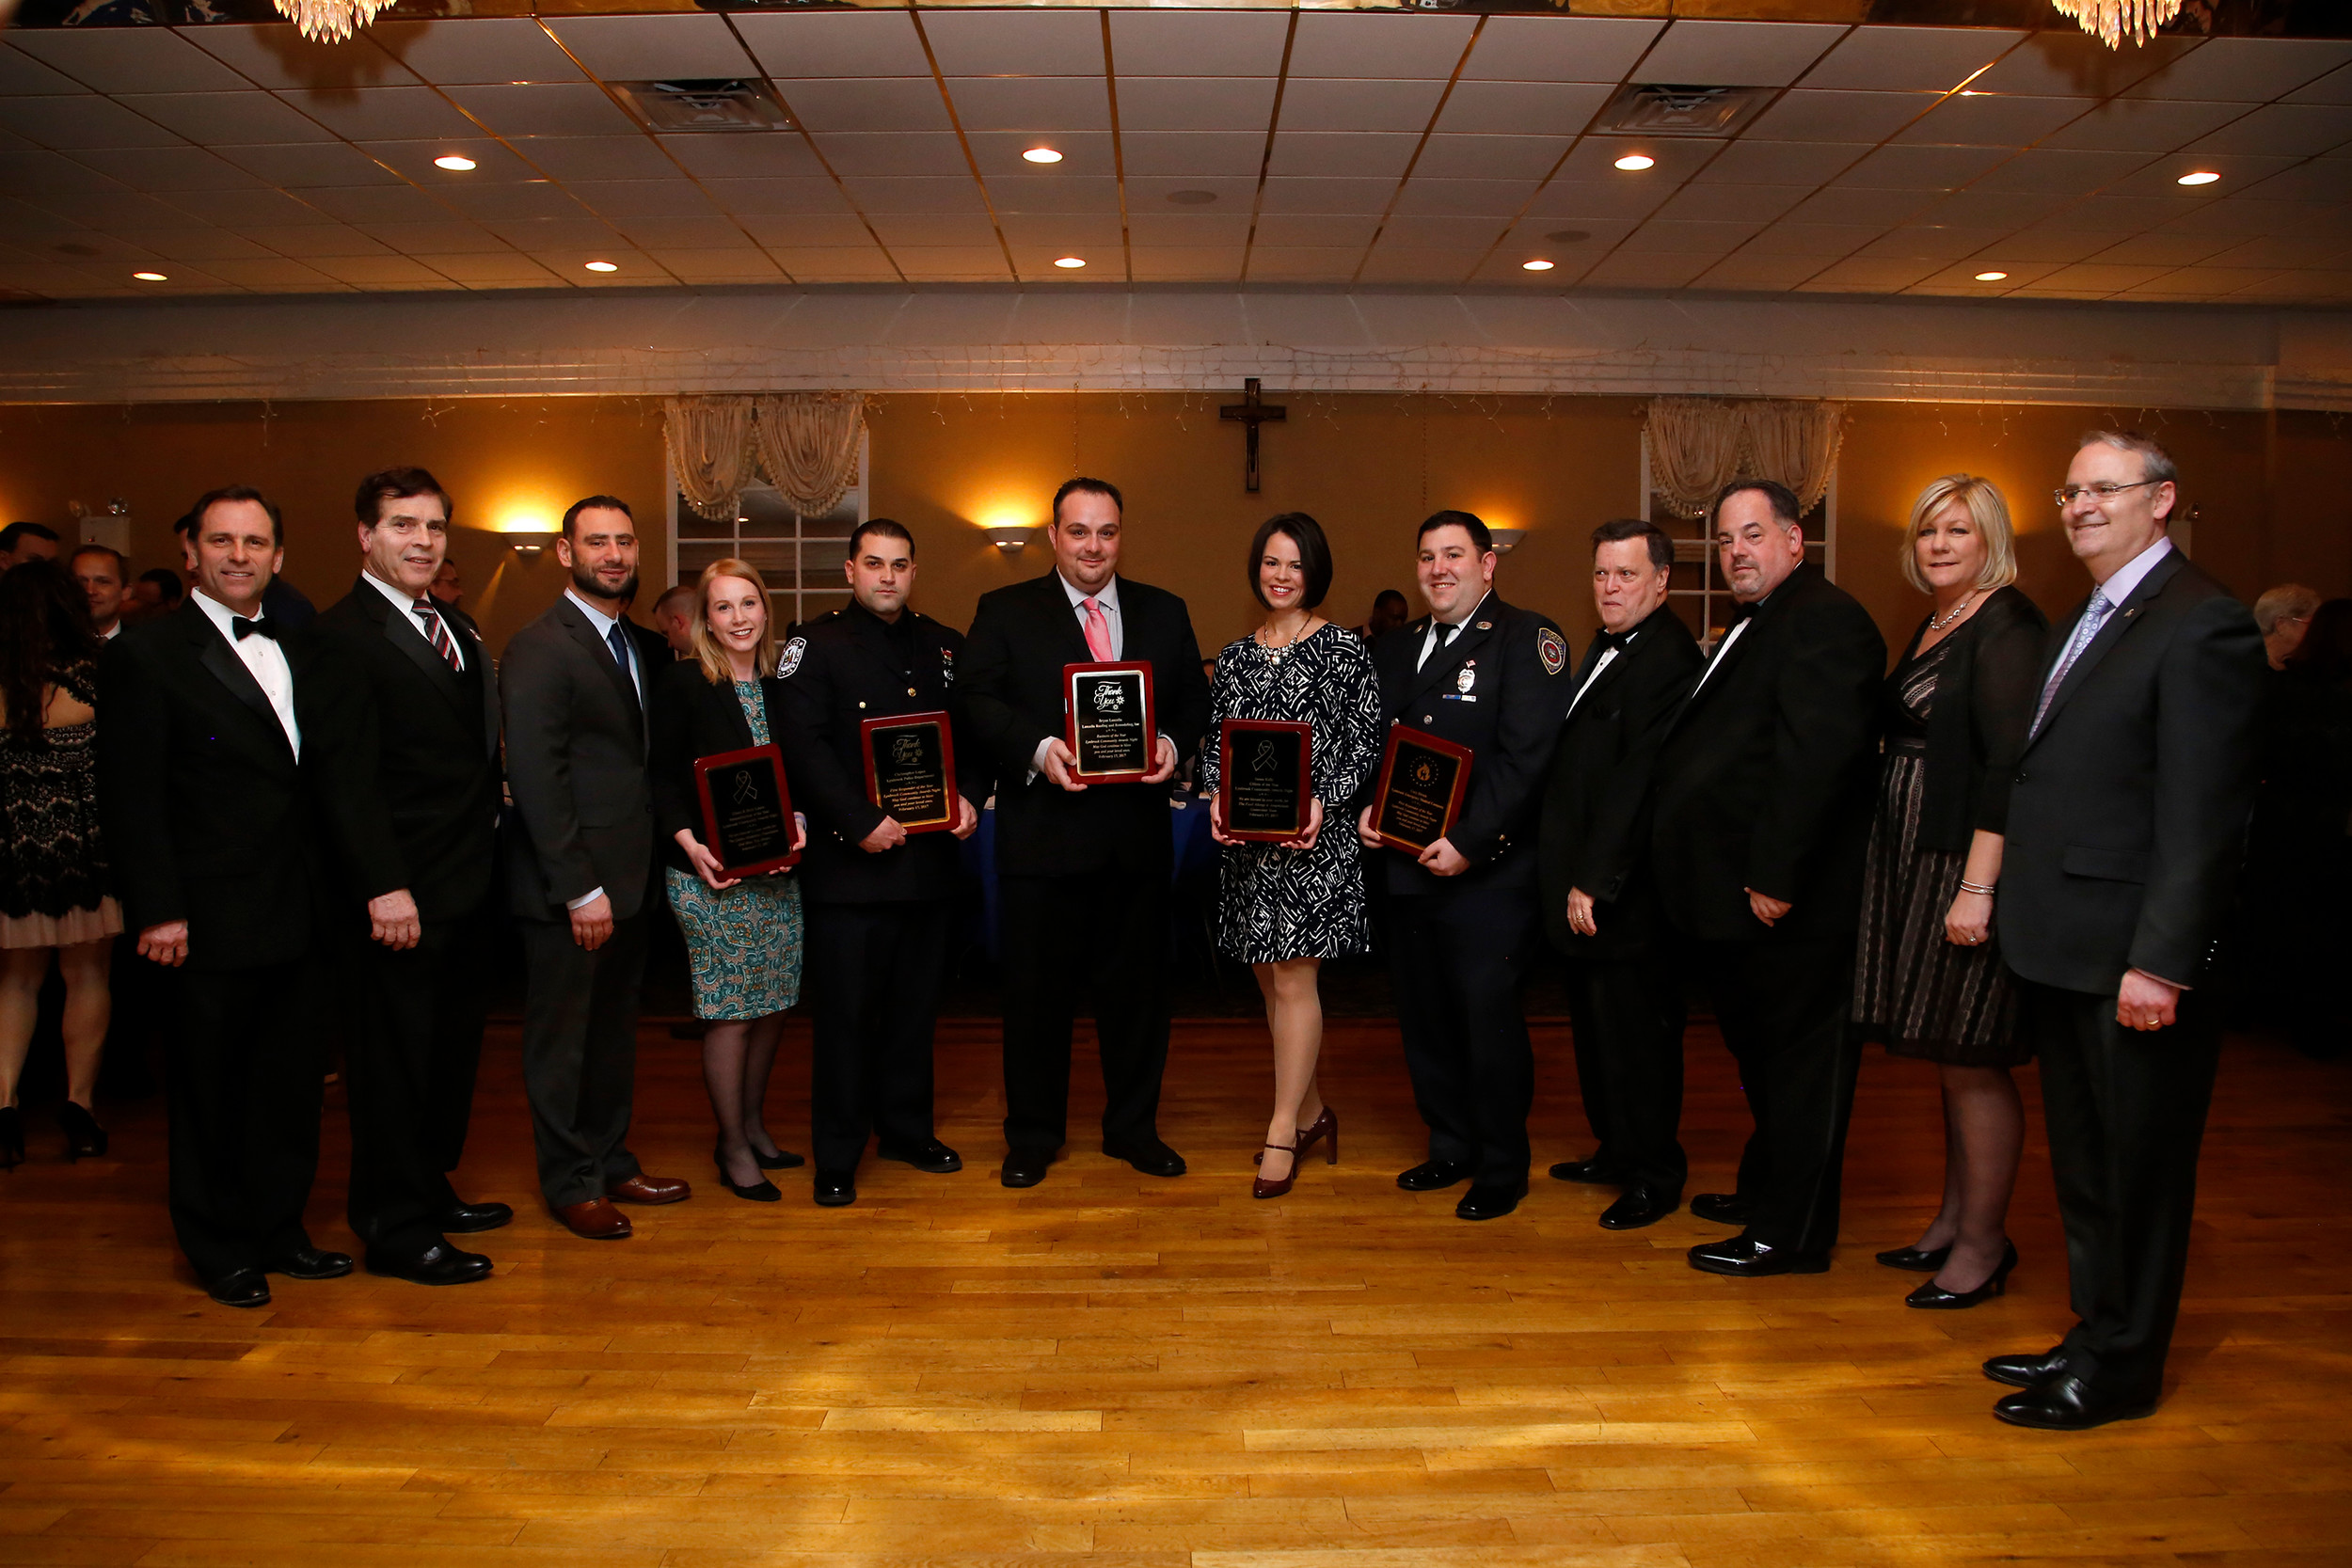 Brett and Eileen Linzer, third and fourth from left, were among the award recipients. They were honored with the Humanitarians of the Year Award.